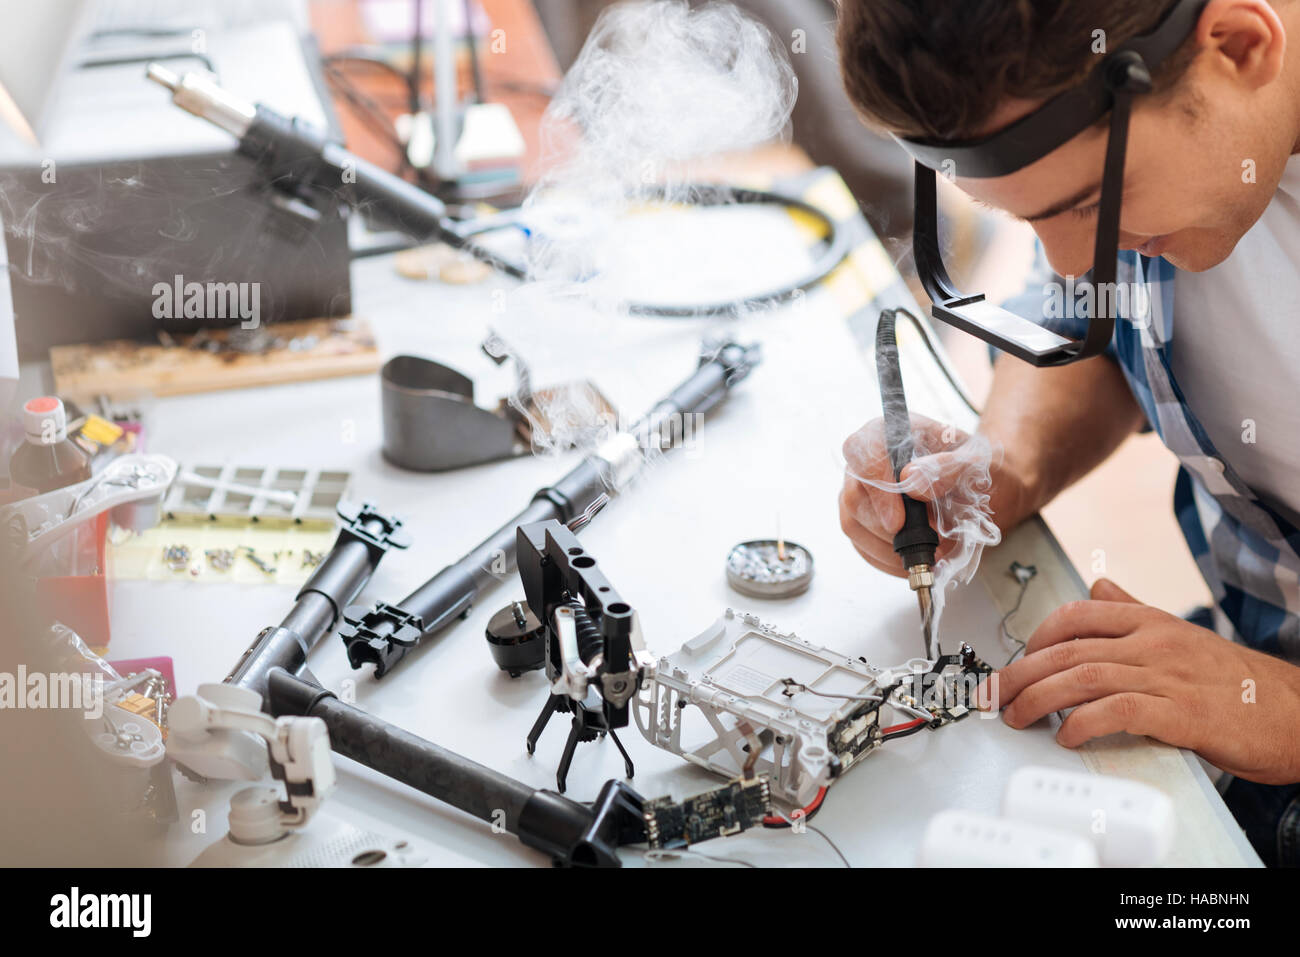 Hardworking man soldering drone details attentively Stock Photo